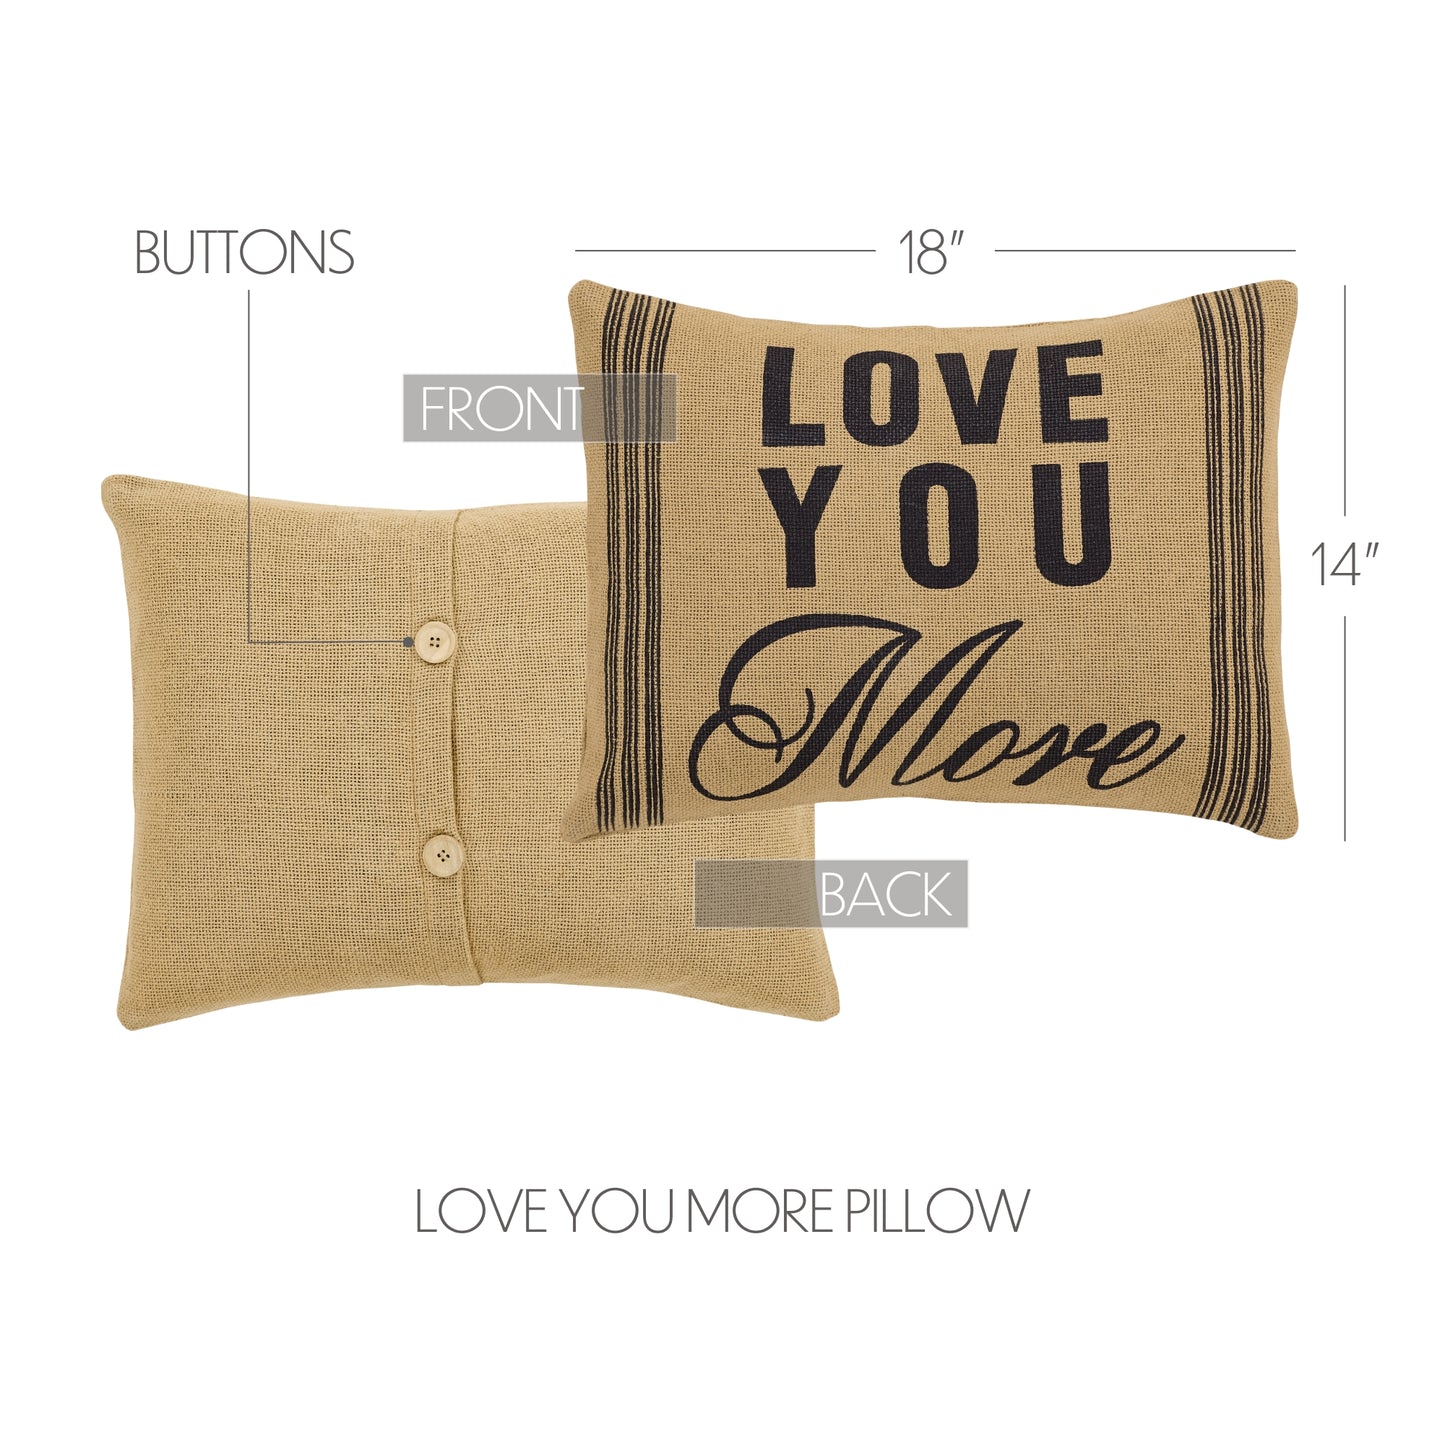 31965-Love-You-More-Pillow-14x18-image-5